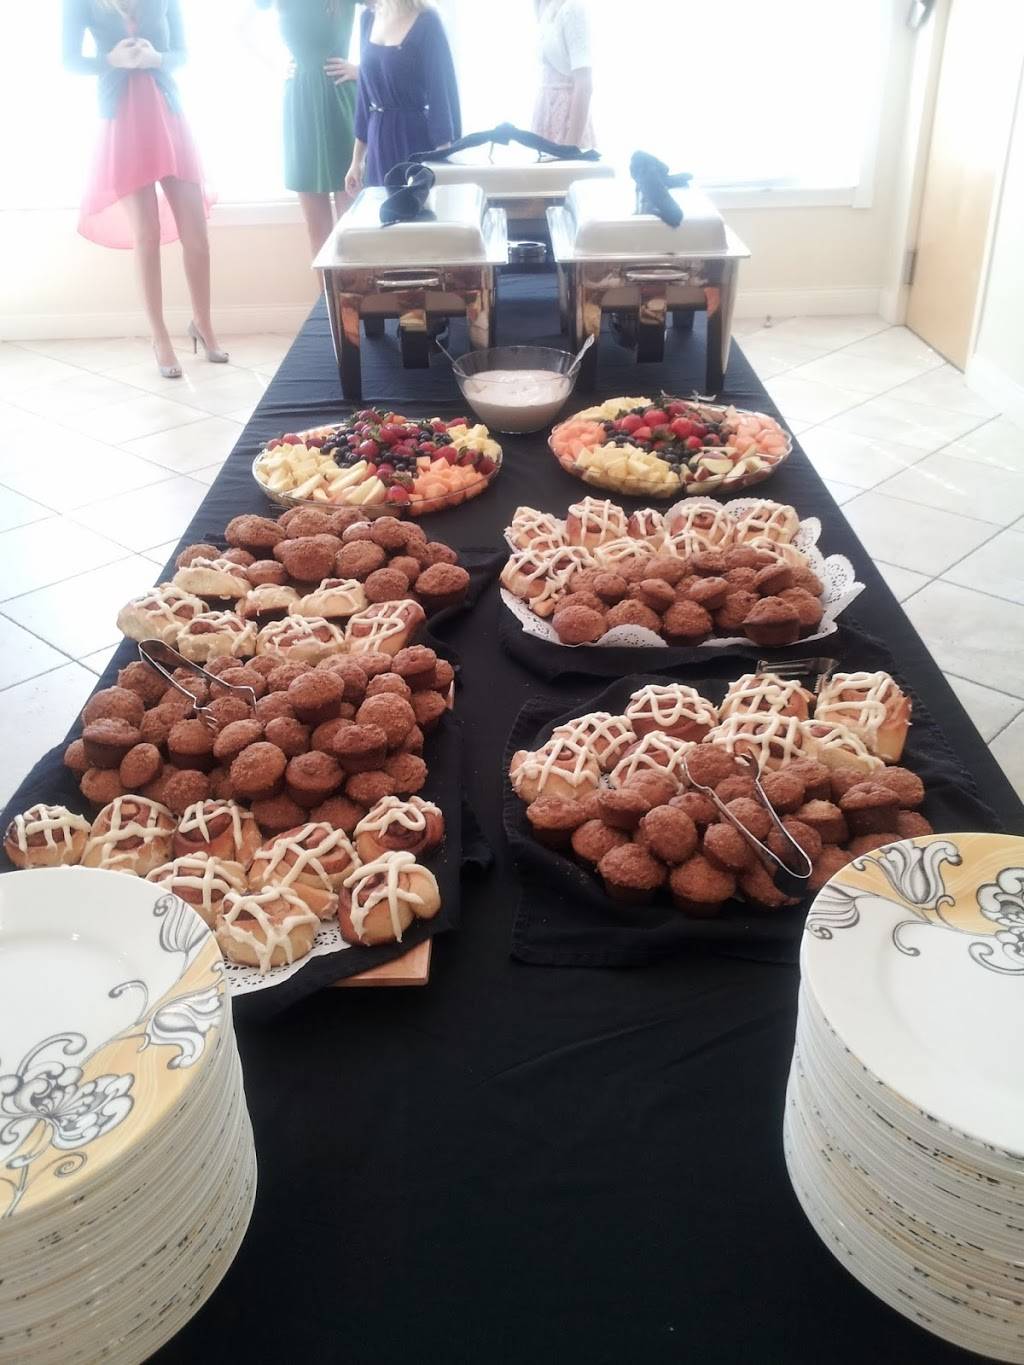 DUO 58 Events and Catering | 2842 S Alafaya Trail, Orlando, FL 32828 | Phone: (407) 494-5577